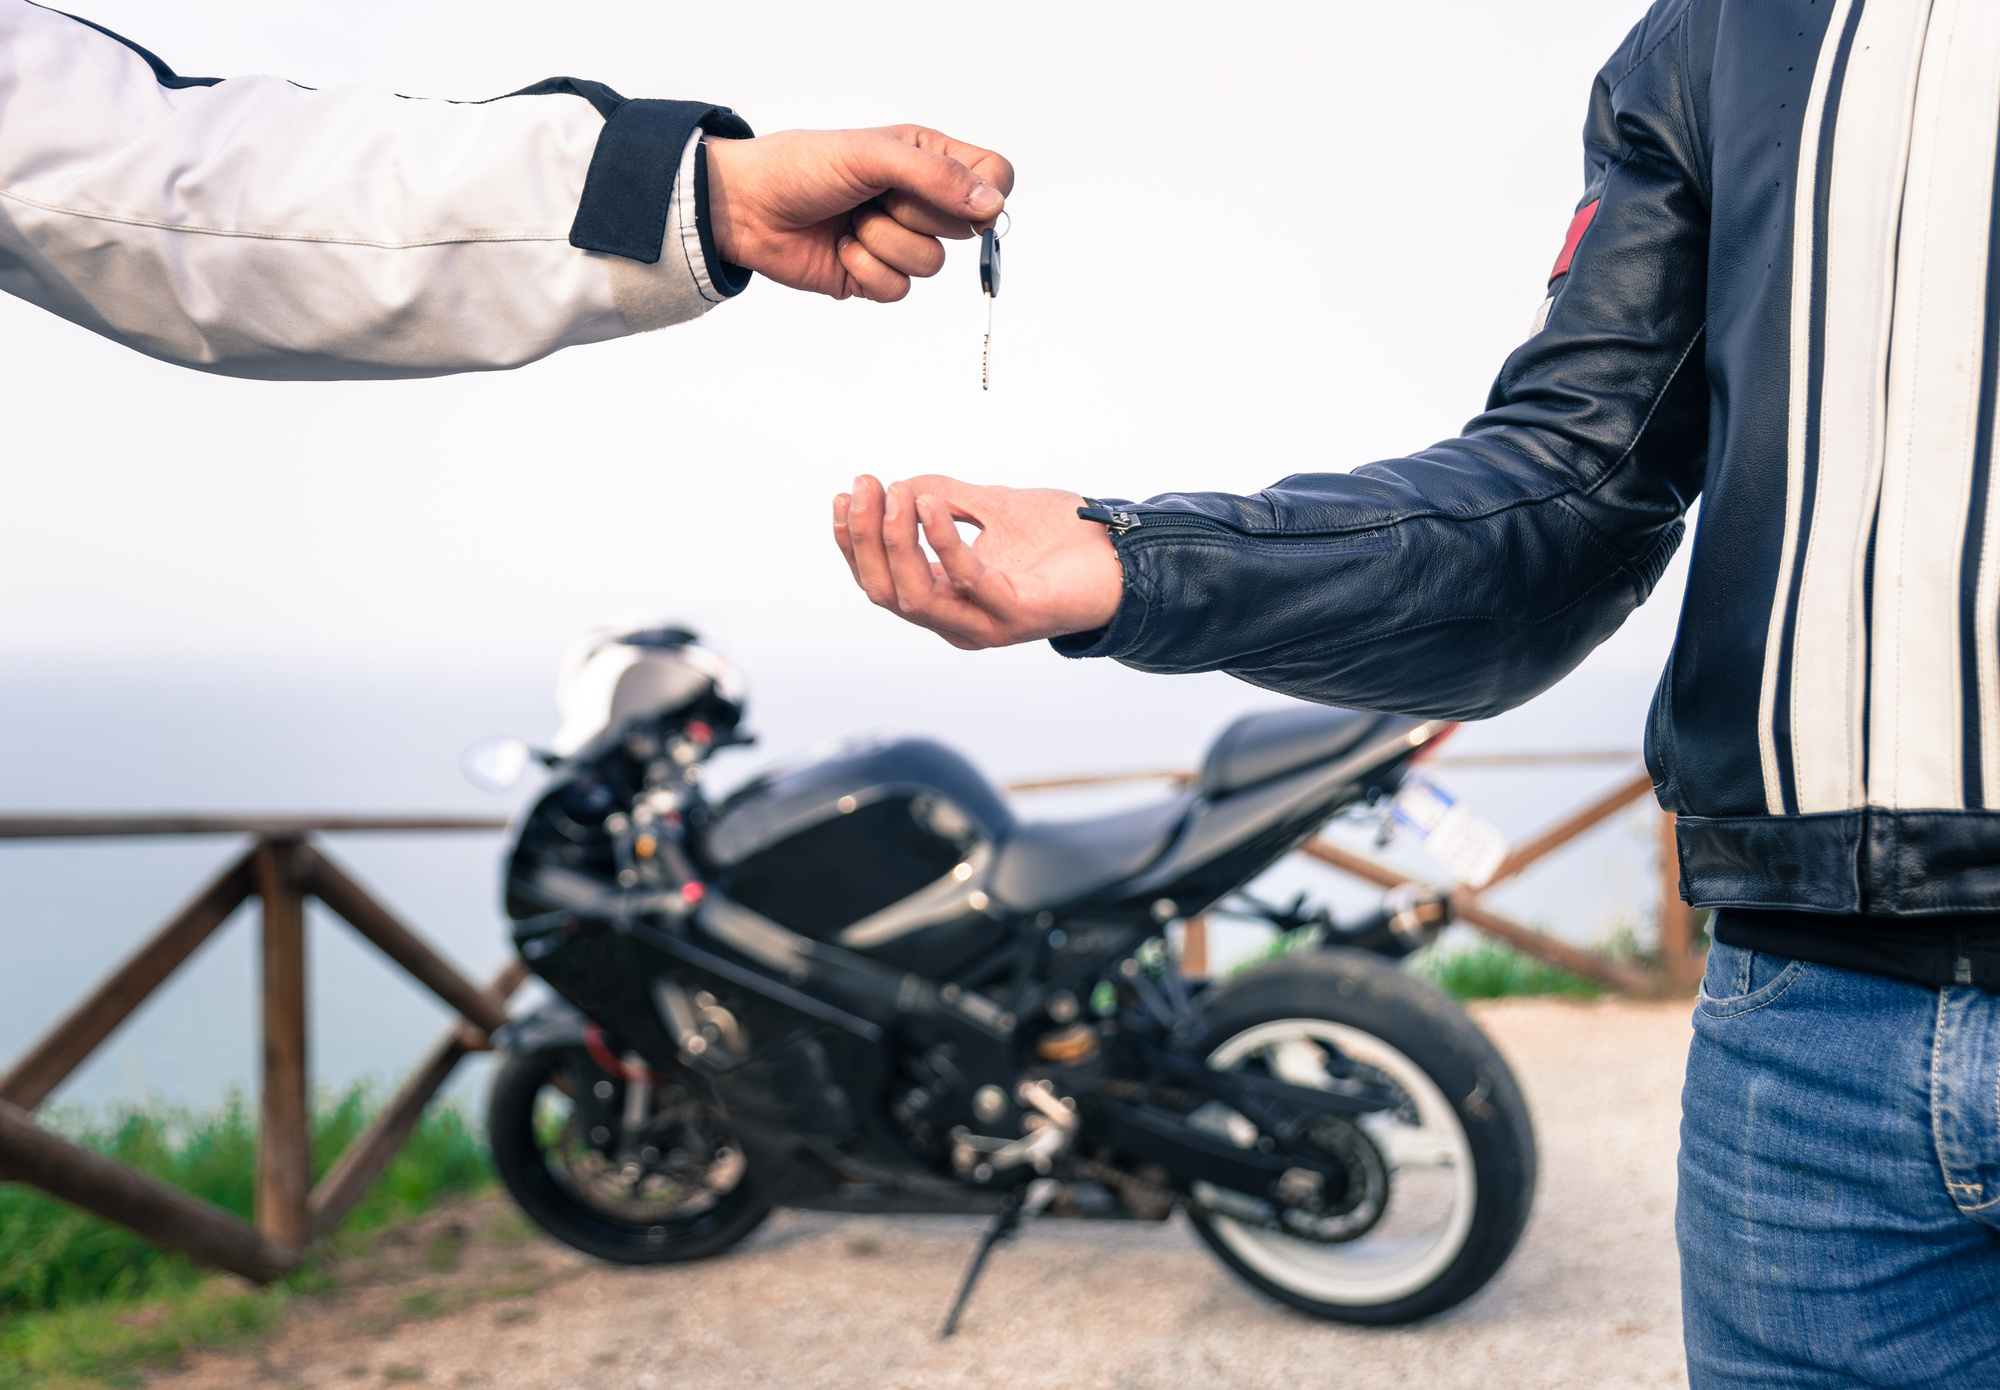 Read This Used Motorcycle Buying Guide Before You Pop More Wheelies